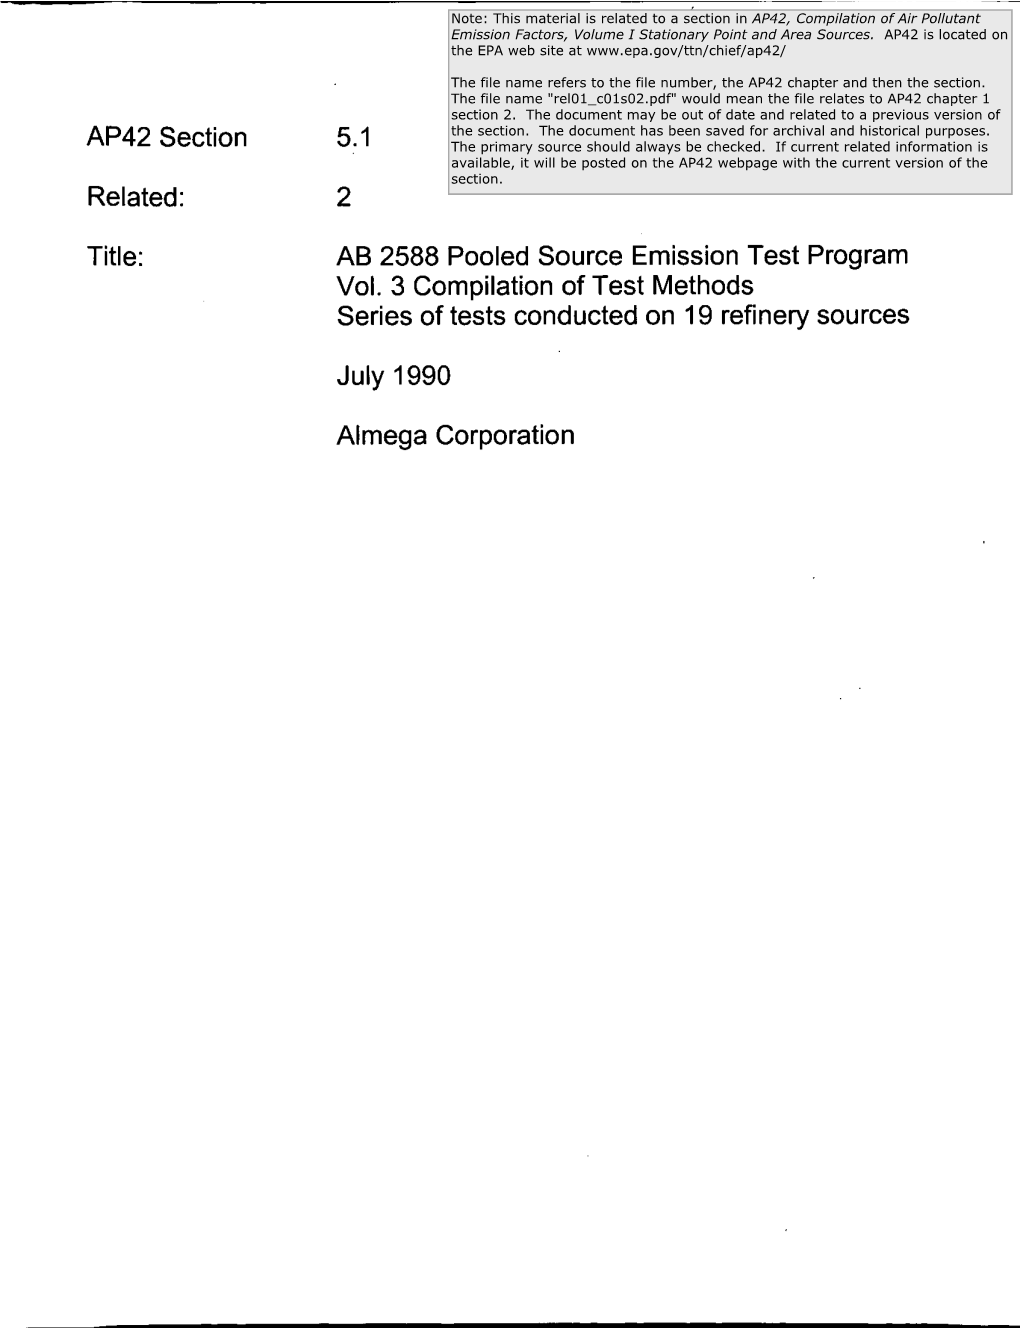 AP42 Section 5.1 Related: 2 Title: AB 2588 Pooled Source Emission Test